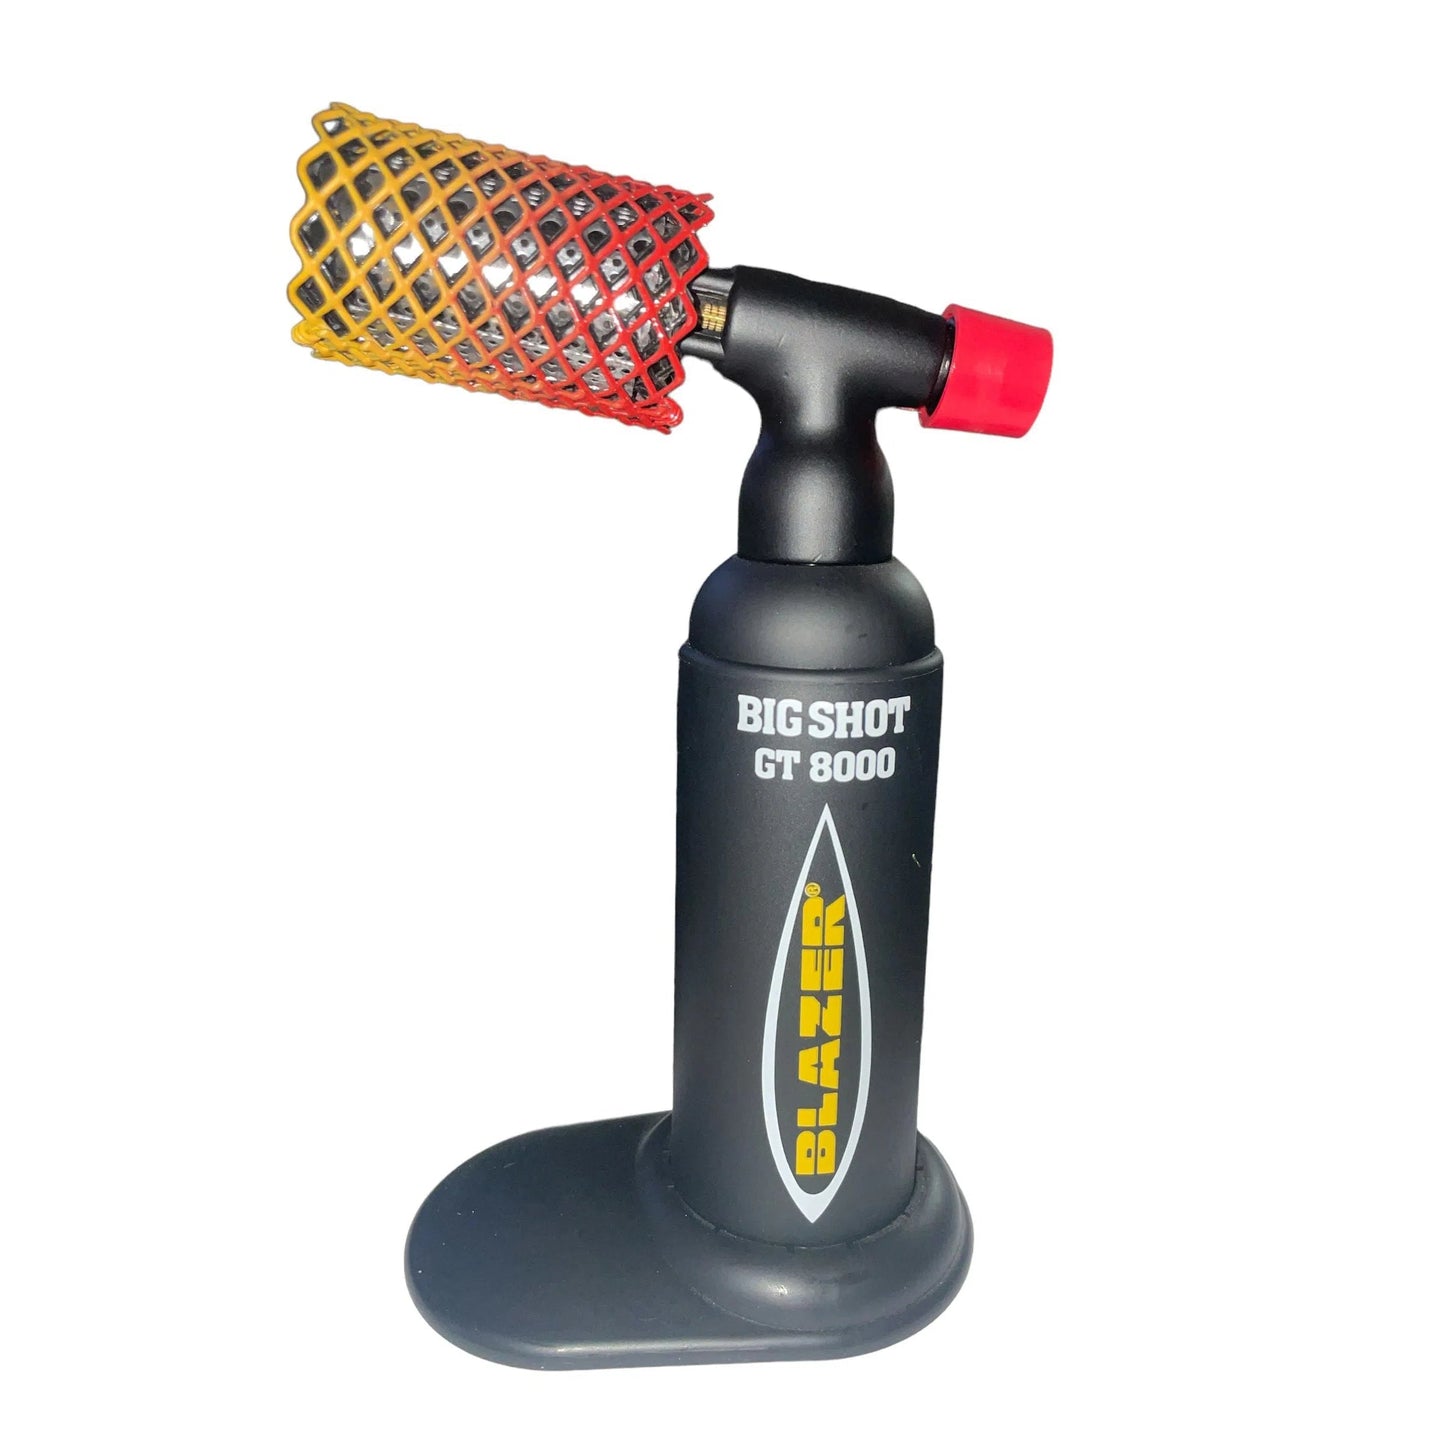 MambaGuardz Torch Guard-Lighters & Torches-MambaGuard-Yellow/Red-NYC Glass